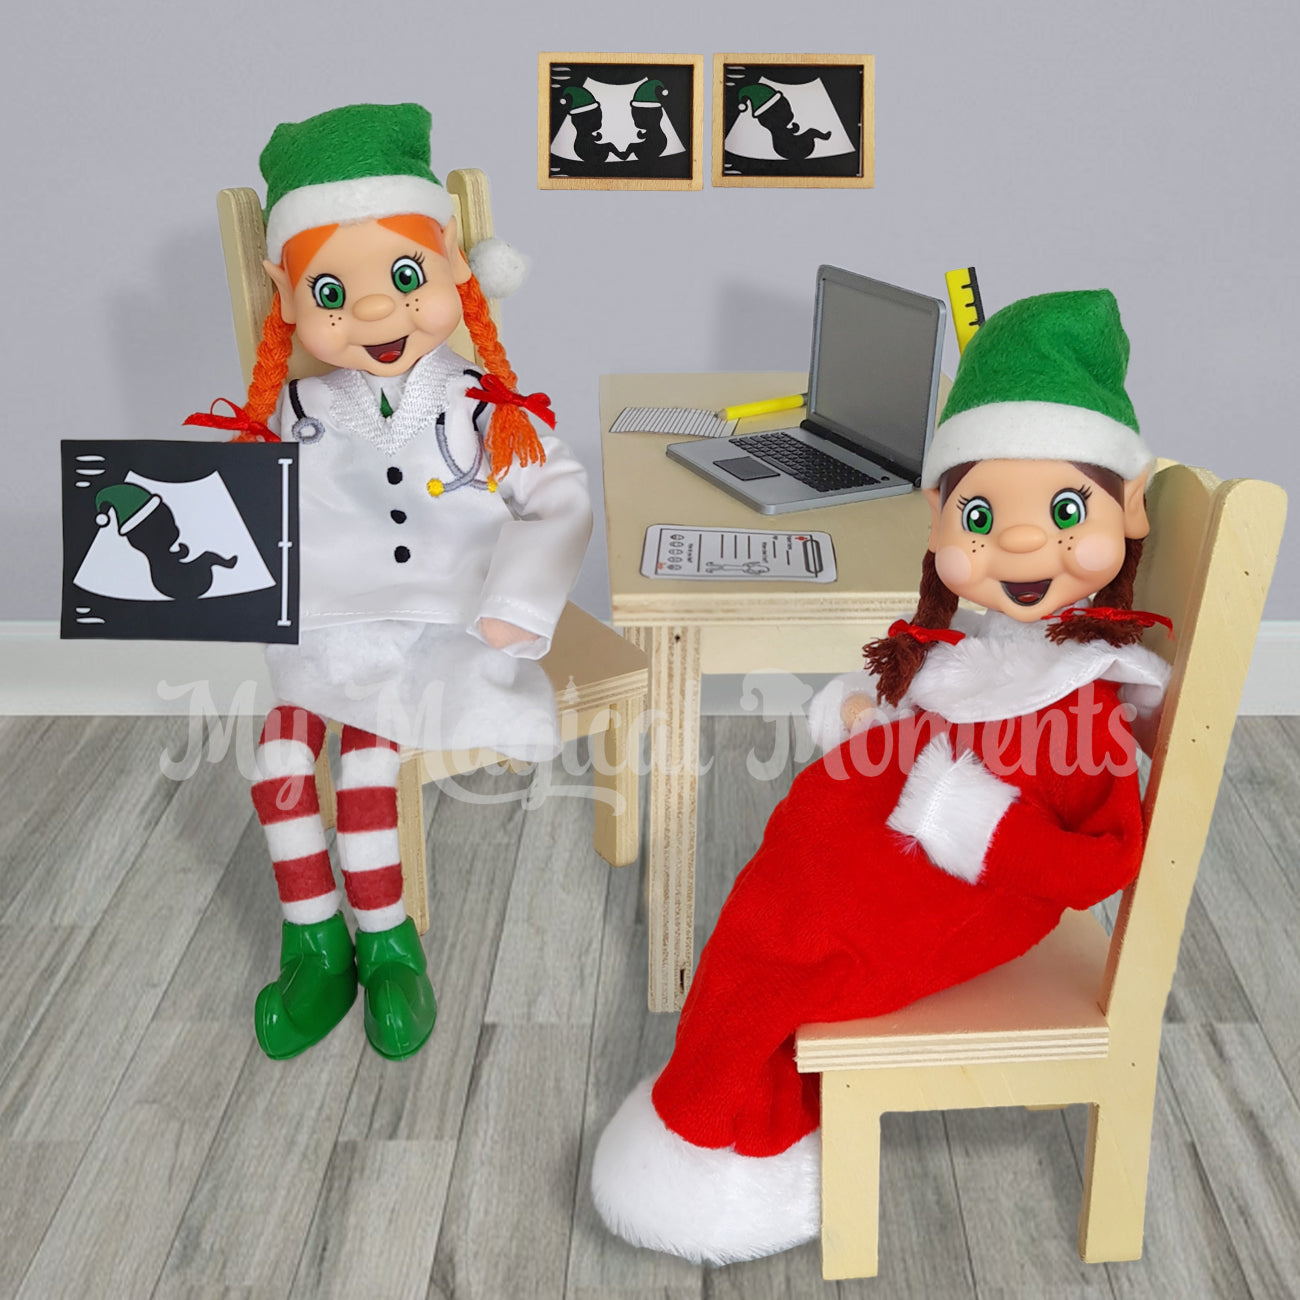 Pregnant elf seeing a doctor and her miniature ultrasound